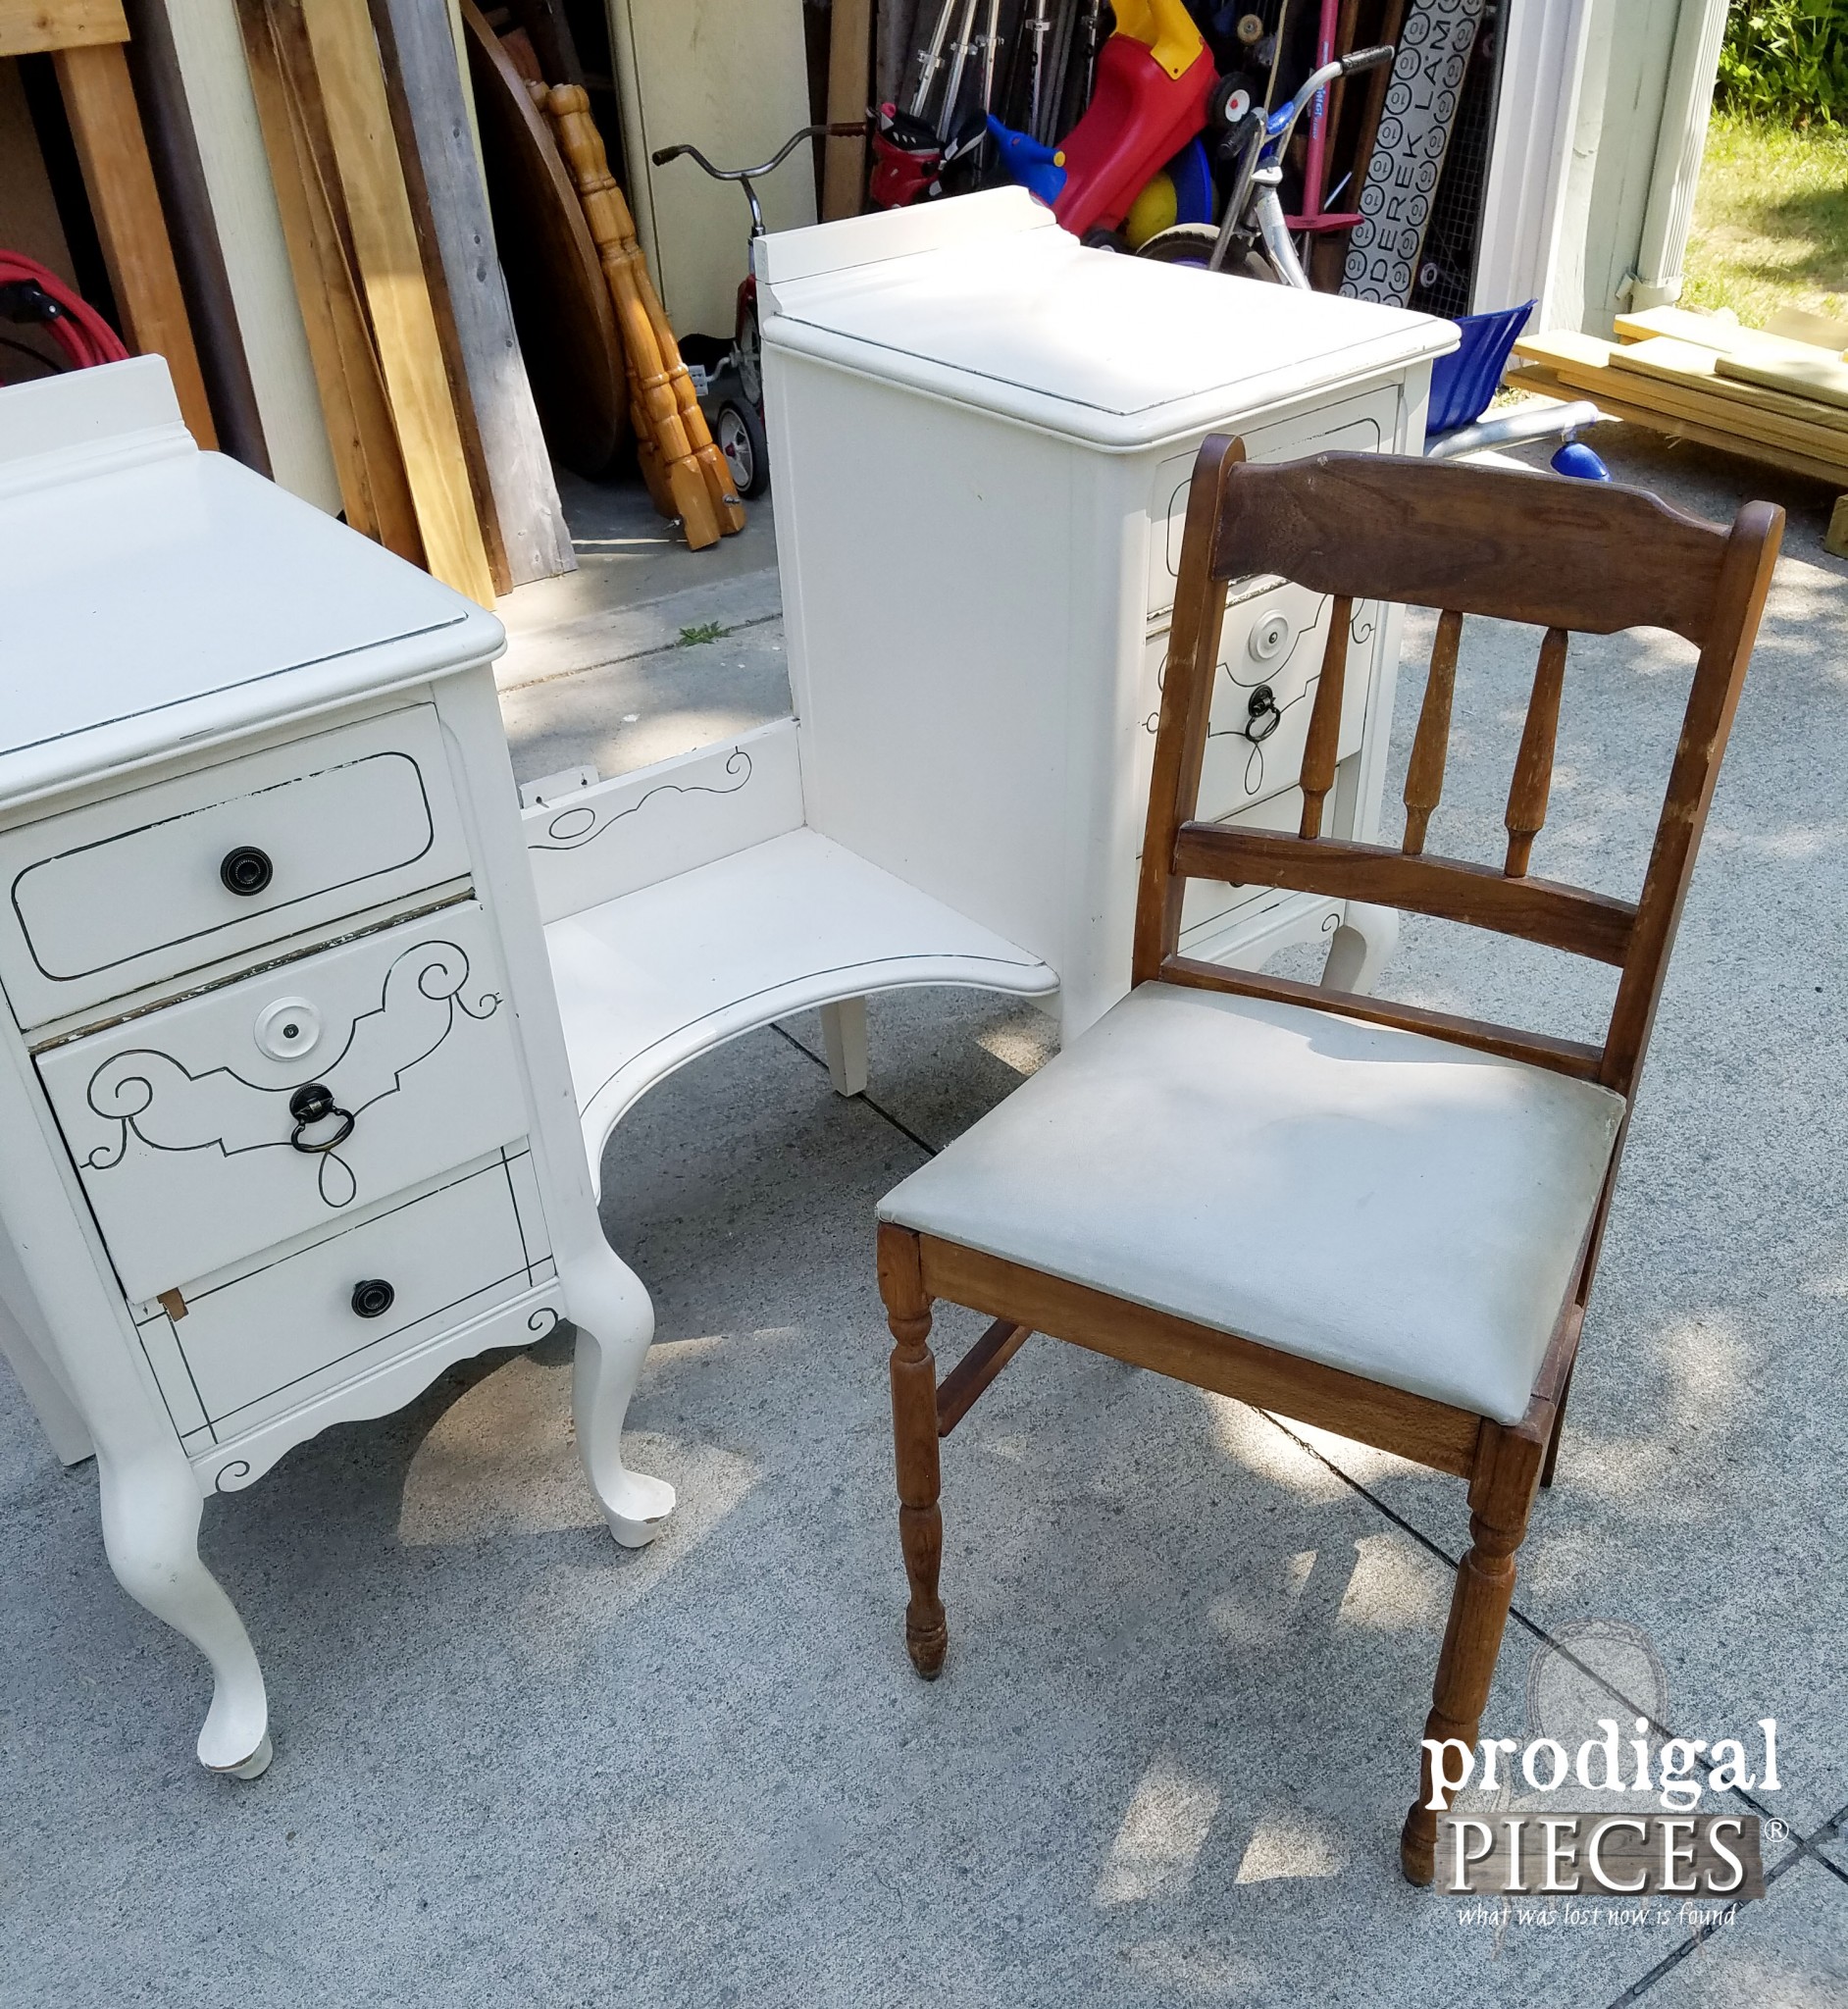 Antique Chair Paired with Vintage Vanity | Prodigal Pieces | www.prodigalpieces.com